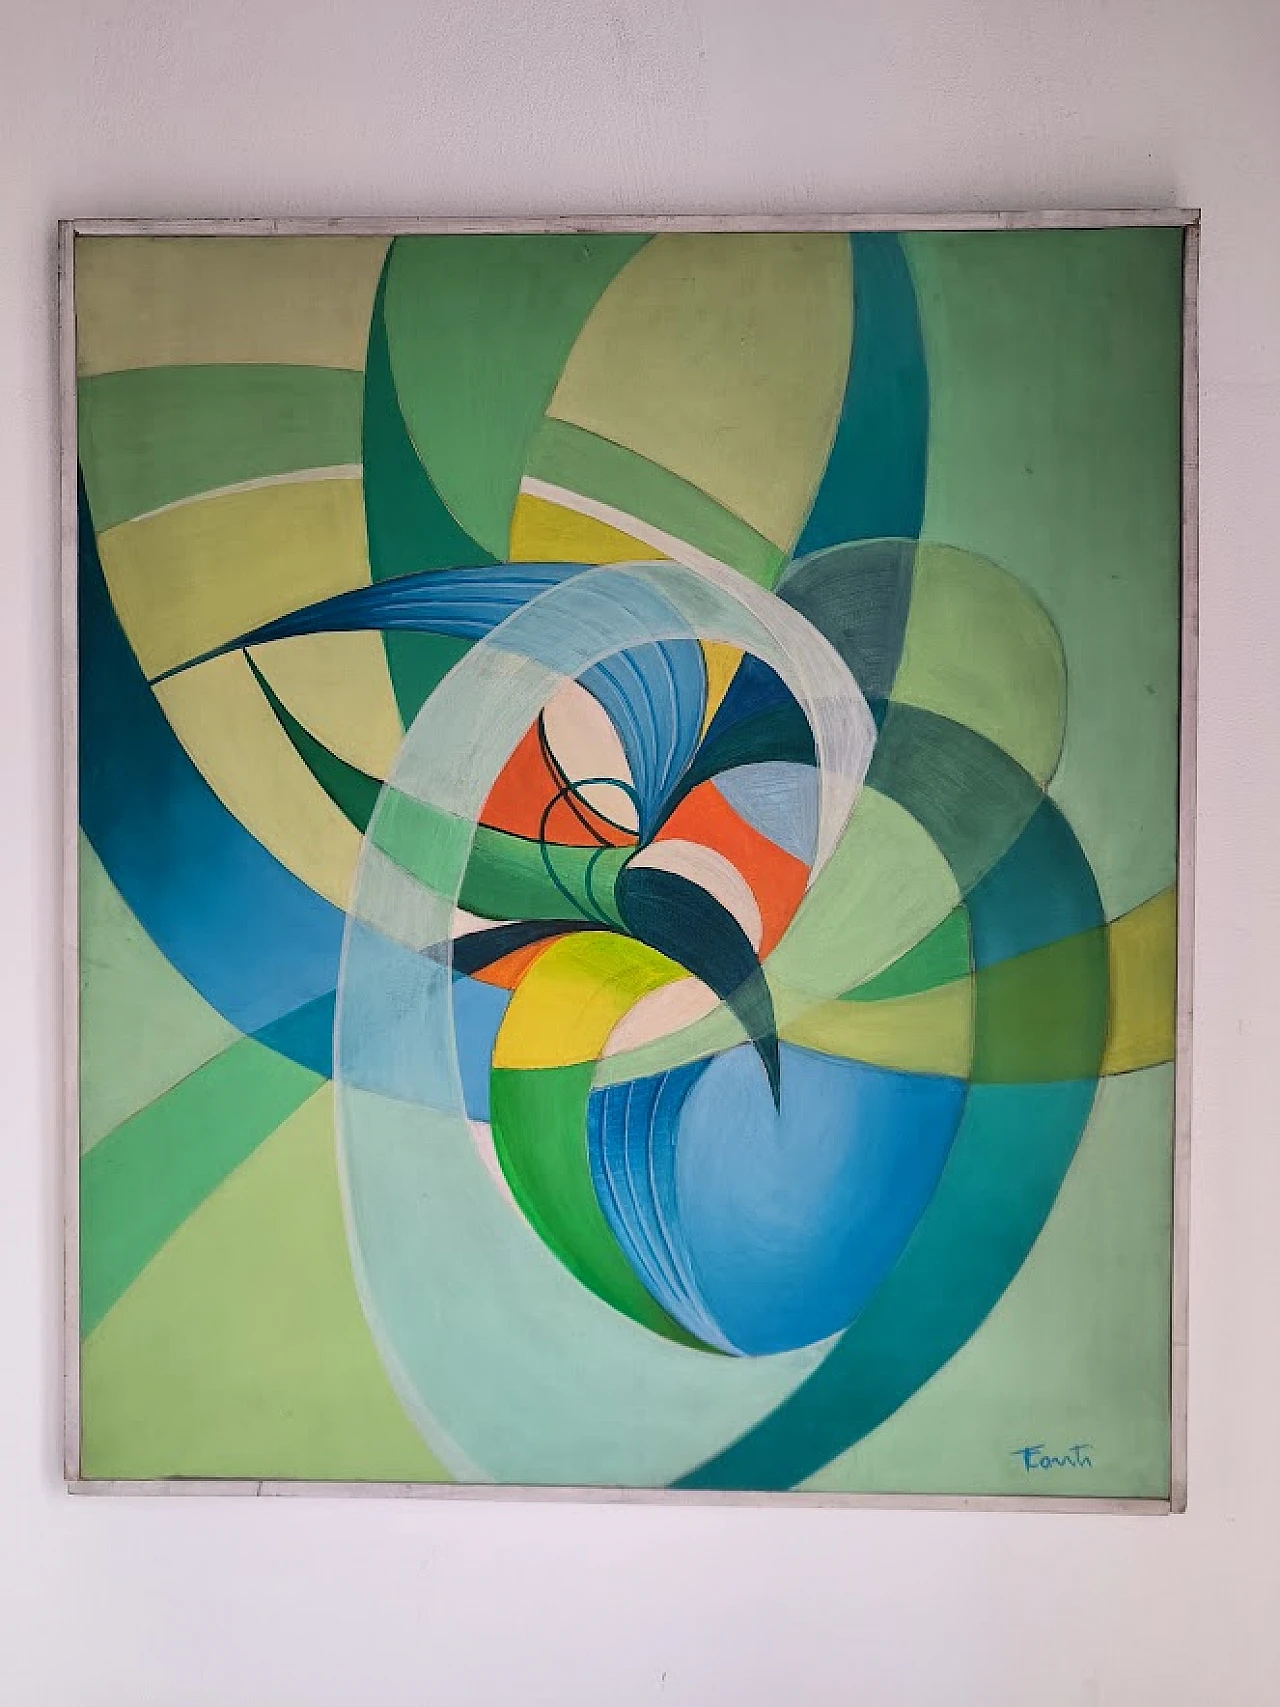 Tina Conti, futurist composition, oil painting on canvas, 1930s 1